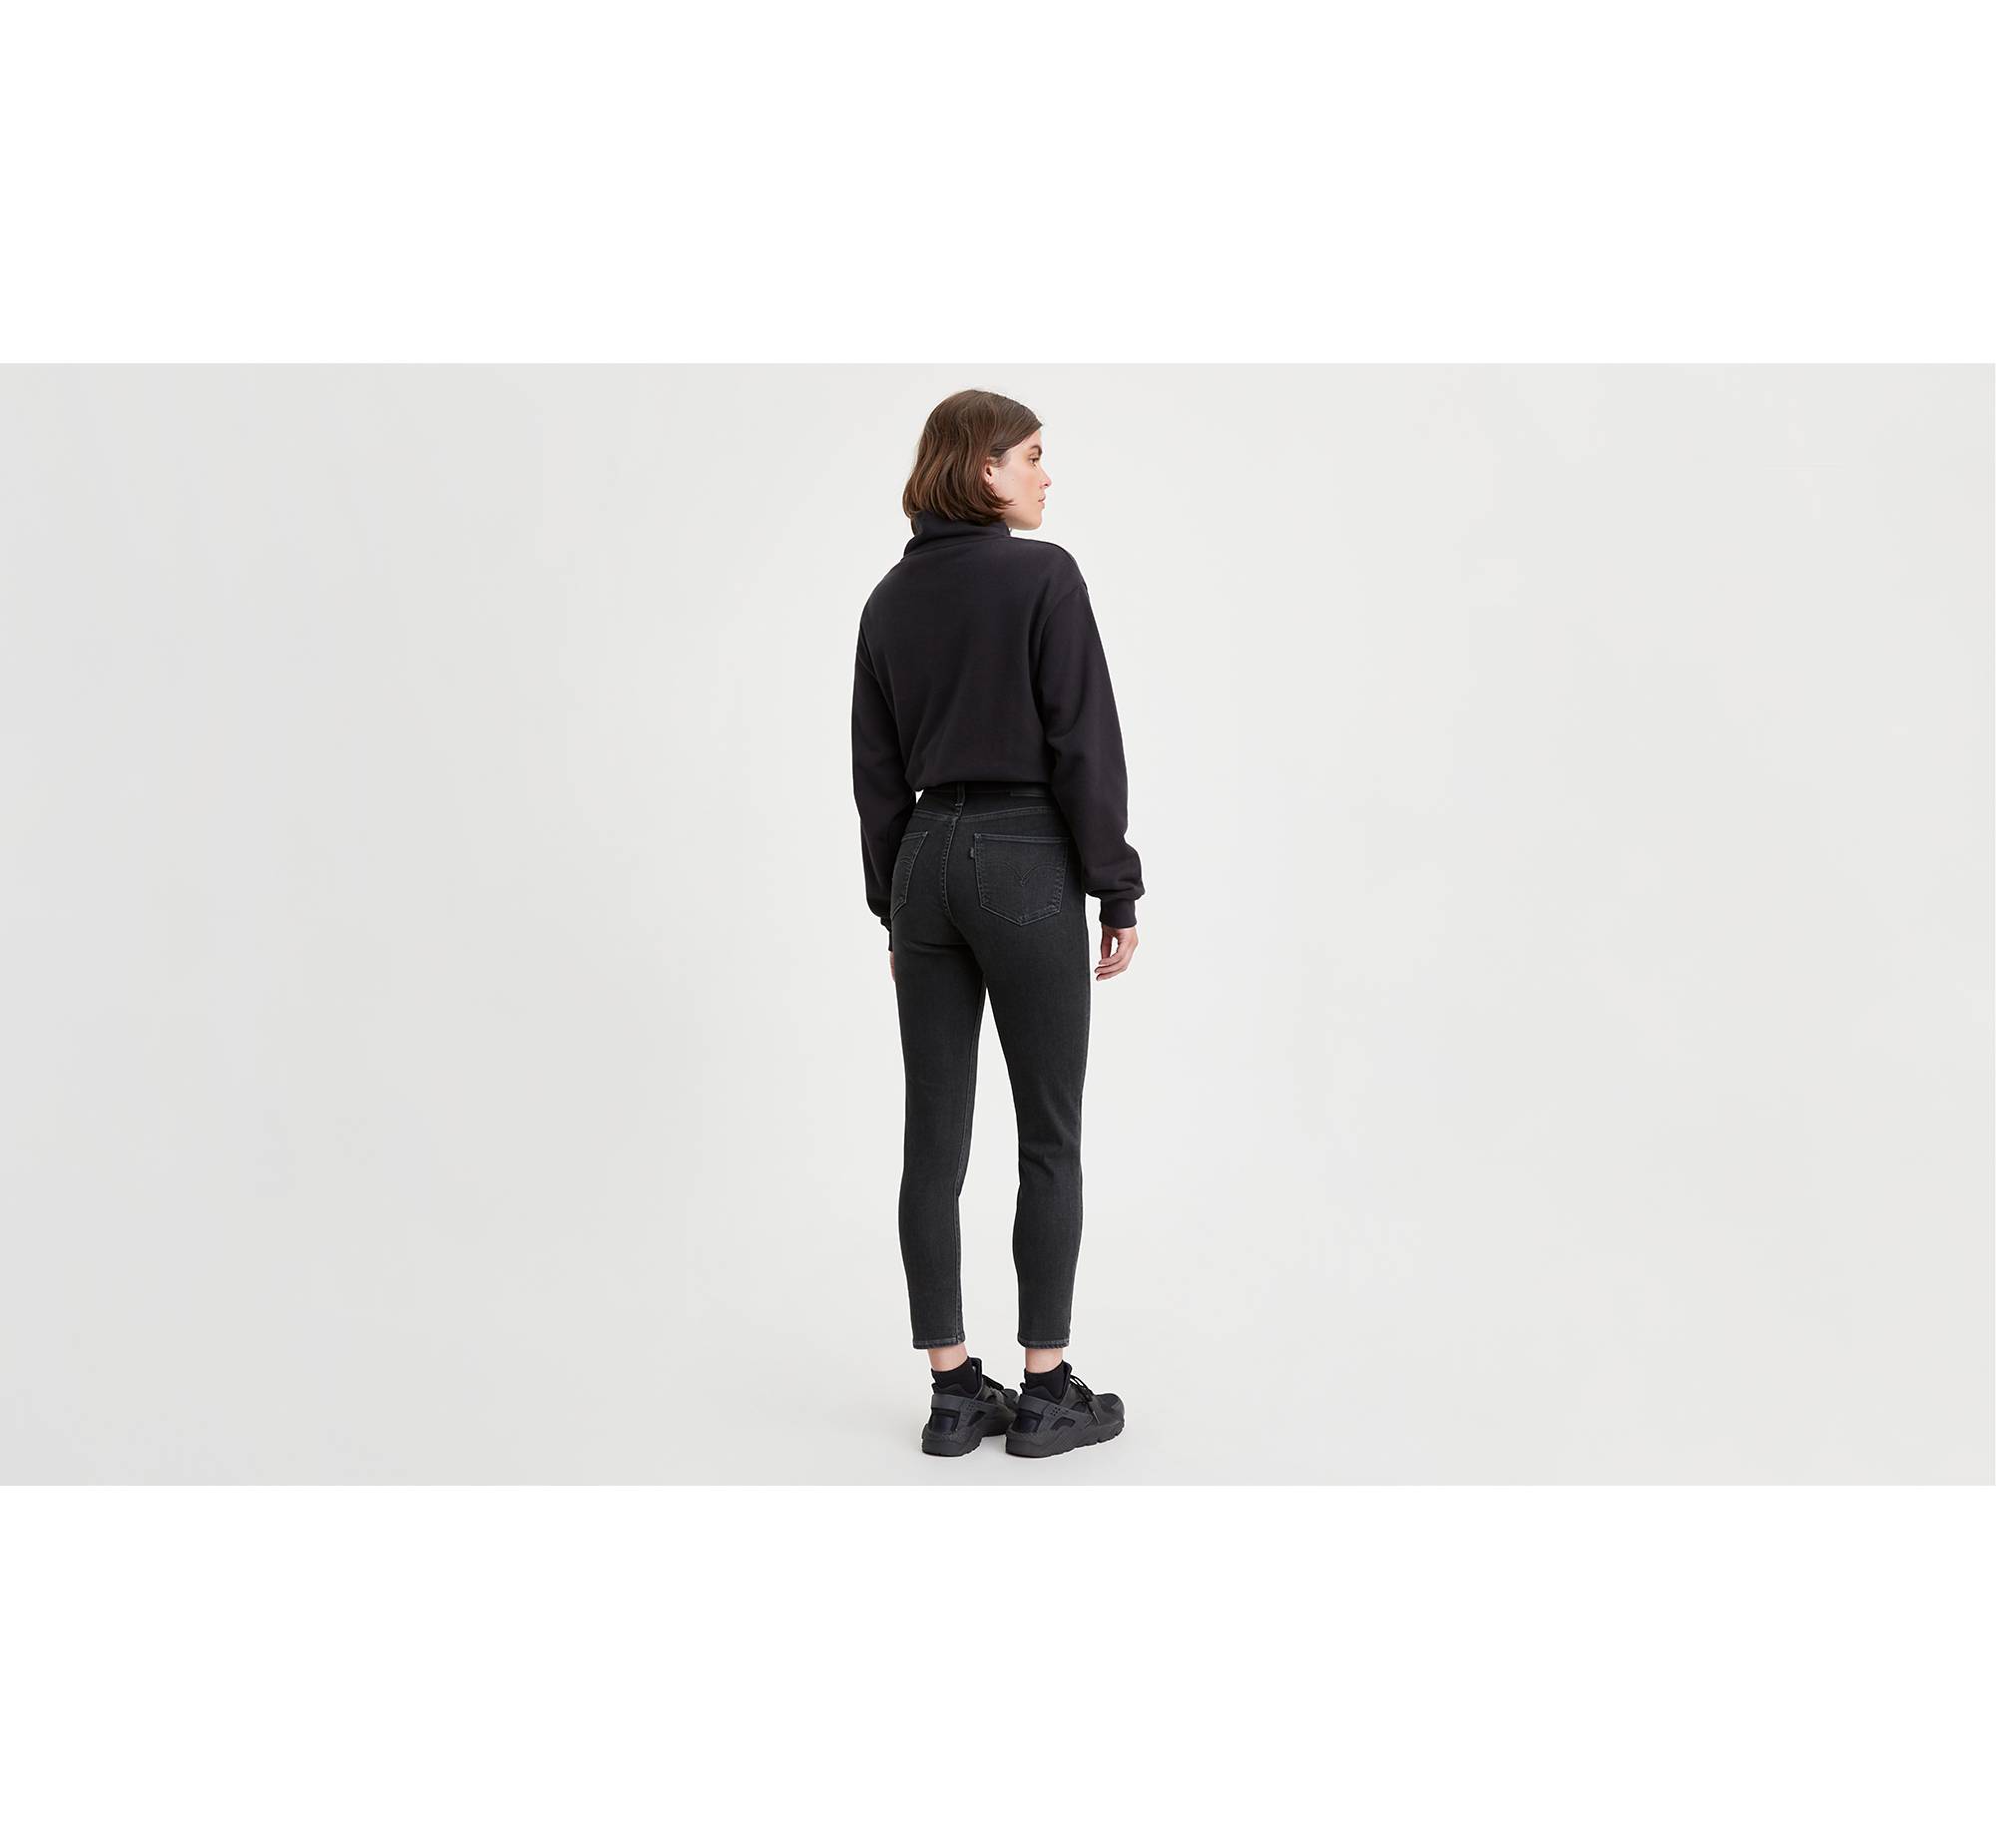 721 High Rise Ankle Skinny Women's Jeans - Black | Levi's® US